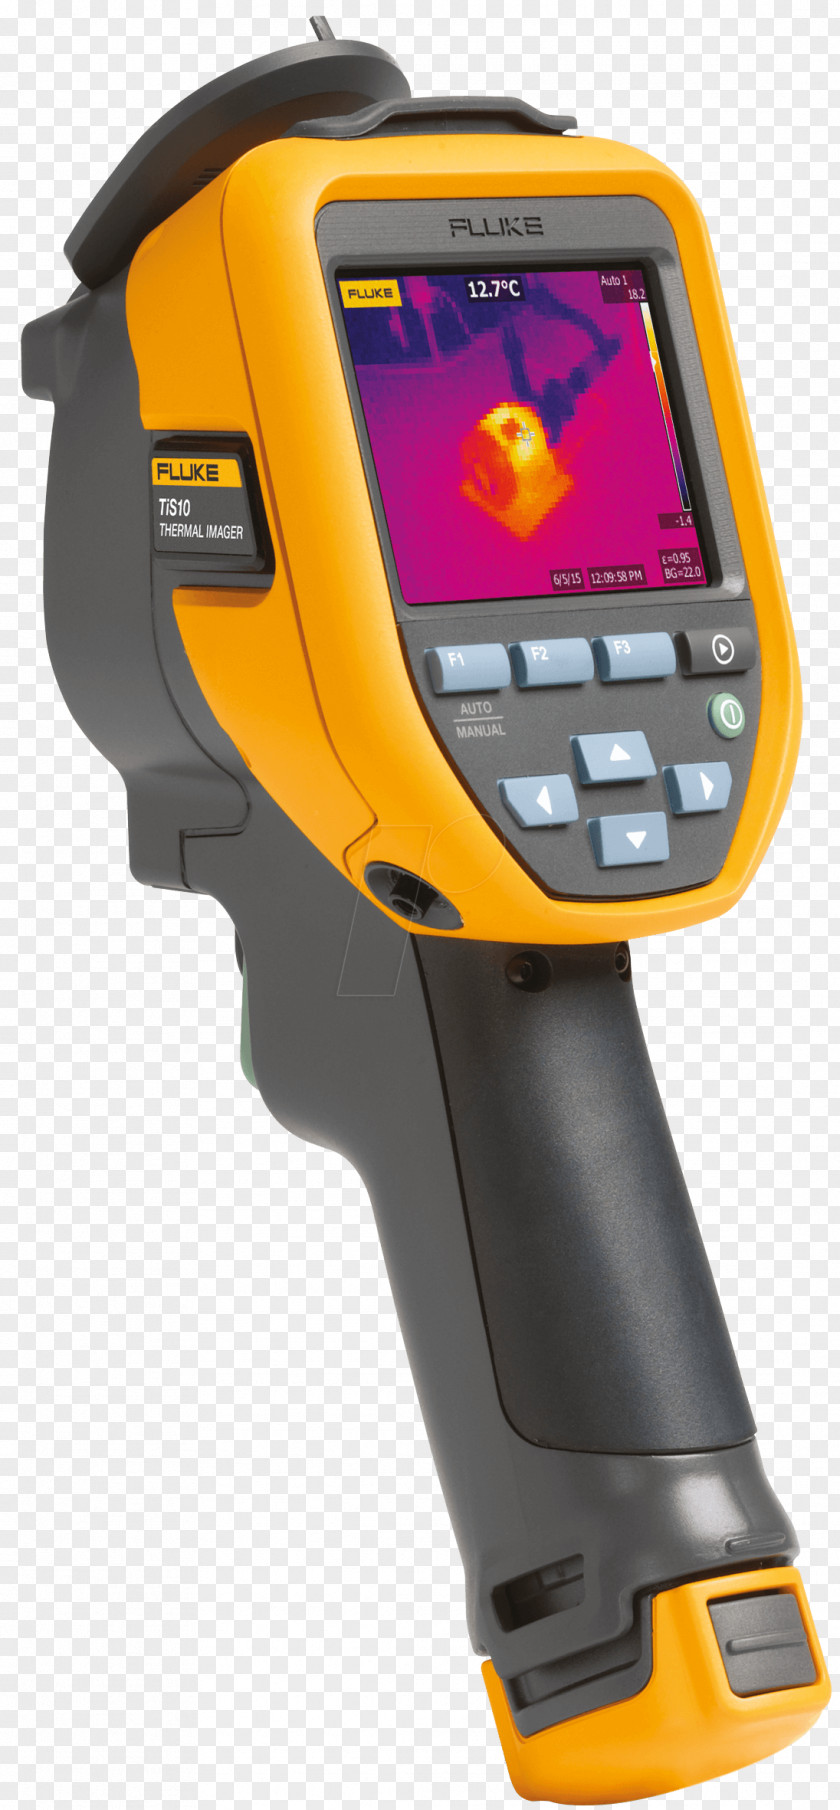 Camera Fluke Corporation Thermographic Thermal Imaging Thermography PNG